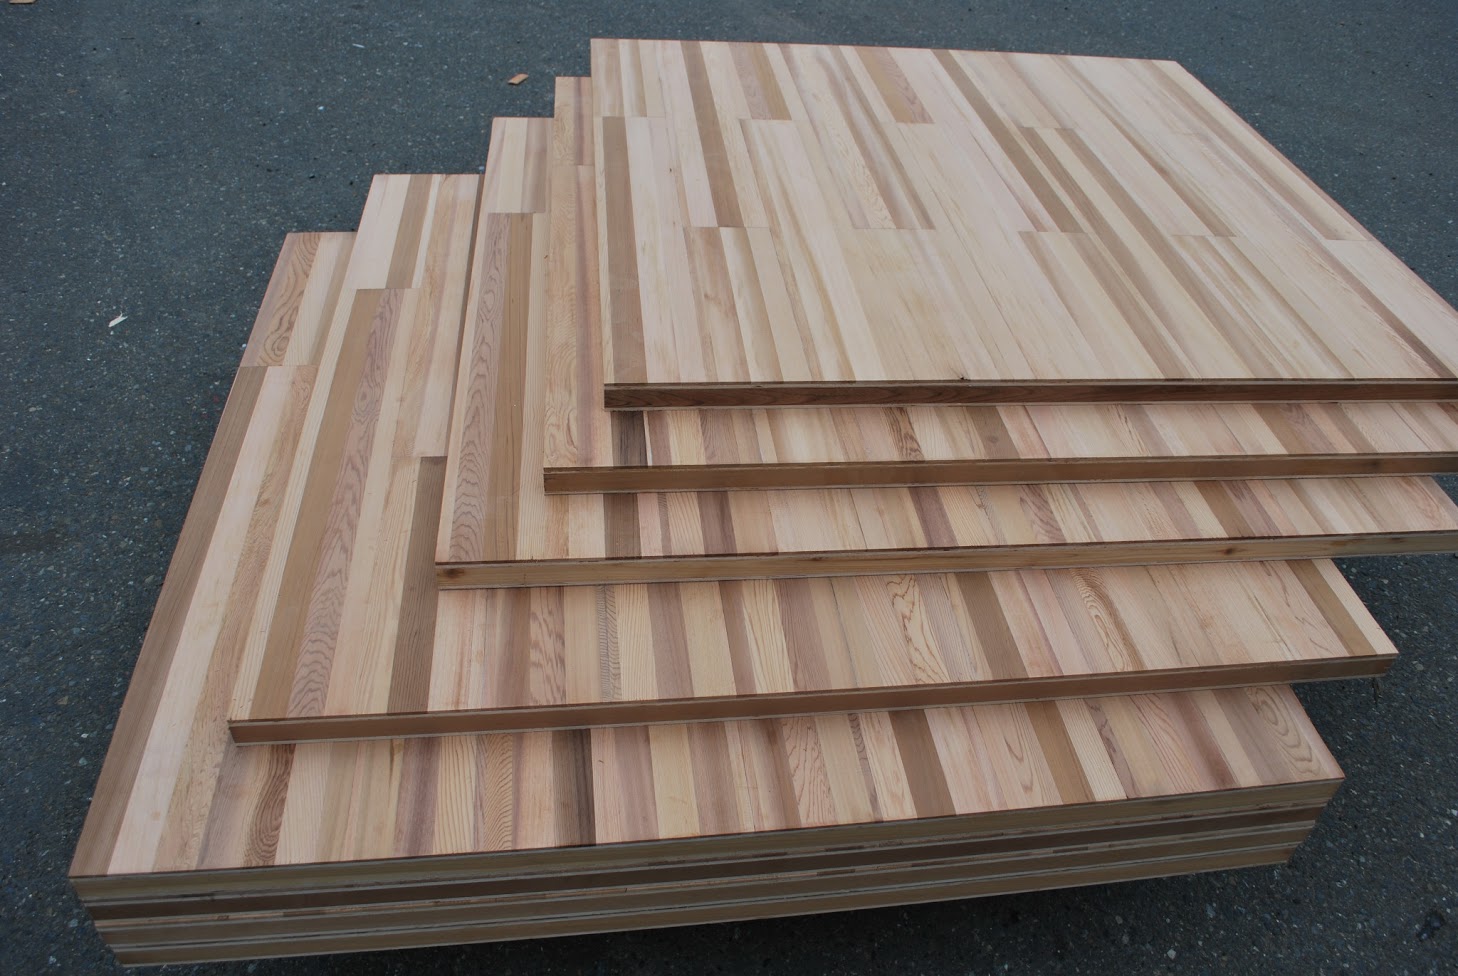 Sing Honeycomb Panels Patented Plywood | Non-warping patented wooden